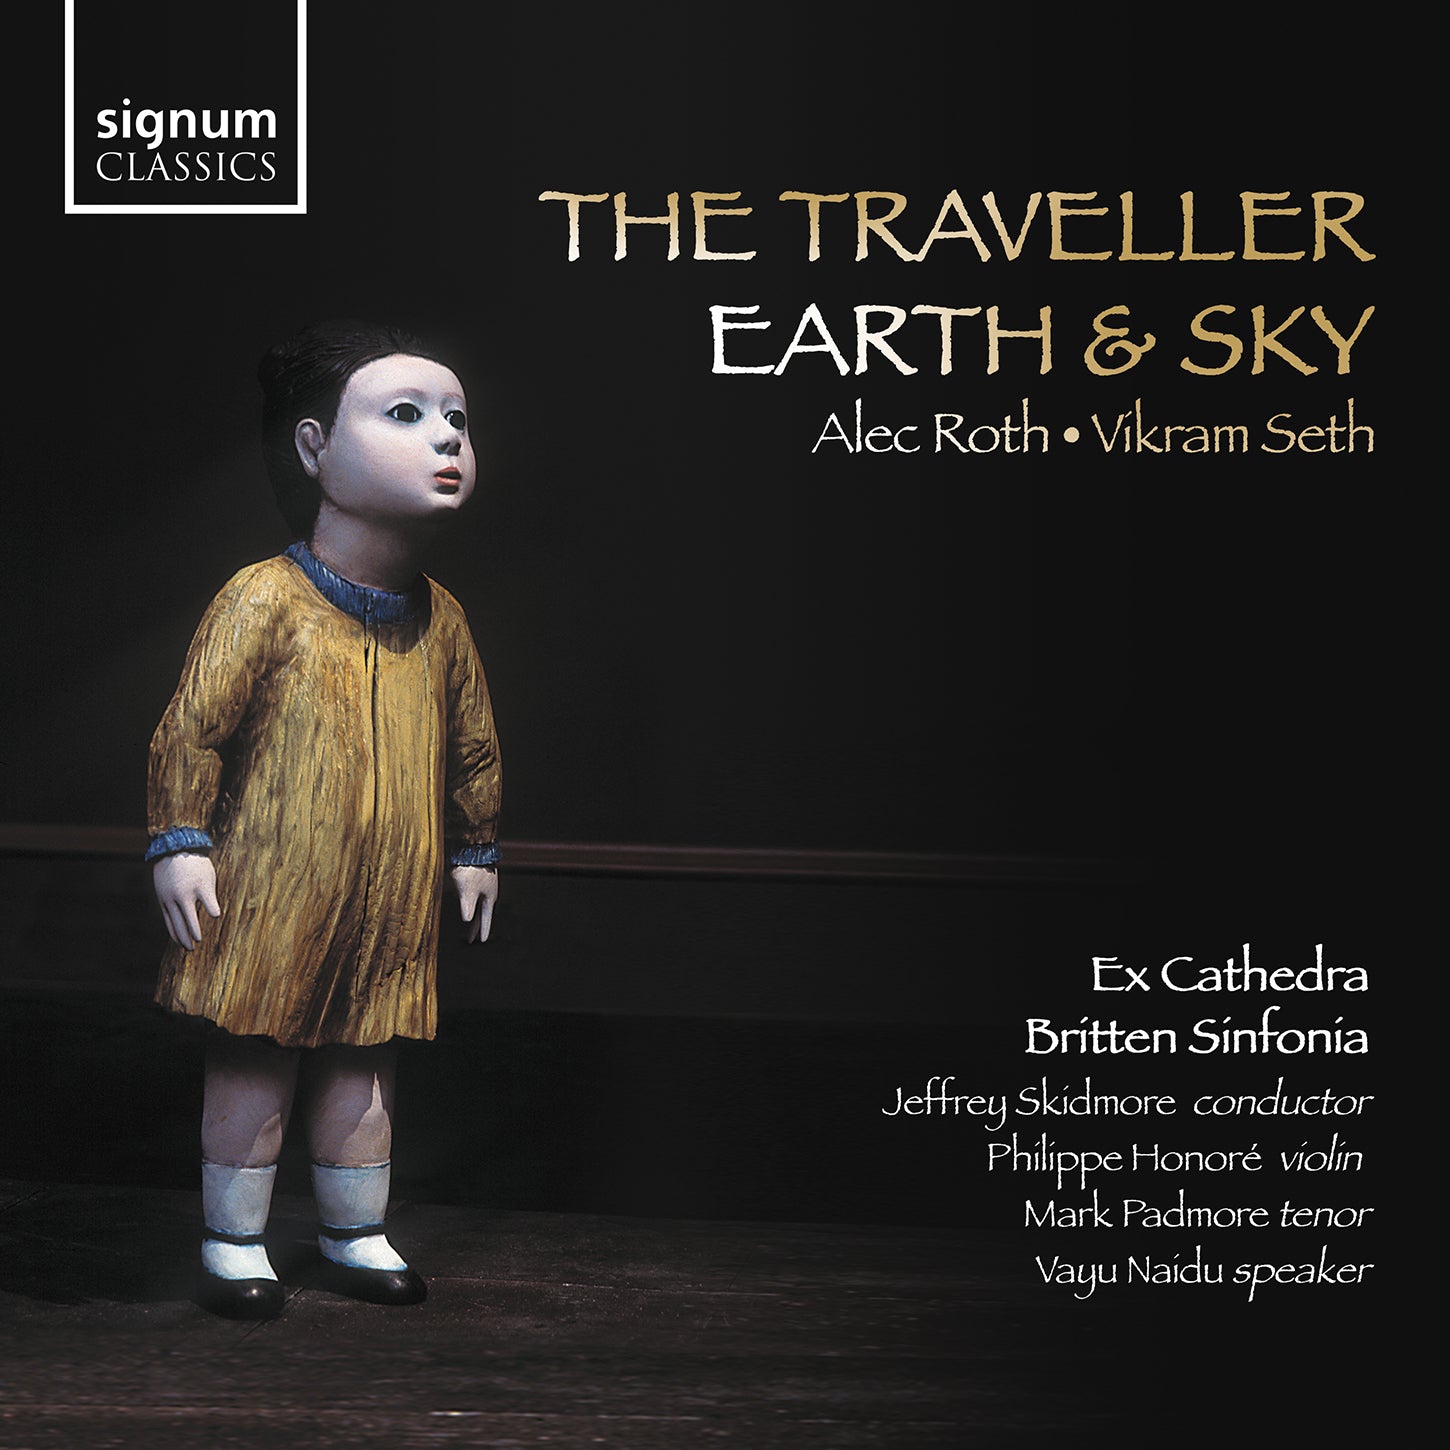 Roth: The Traveller; Seth: Earth & Sky / Ex Cathedra, Britten Sinfonia